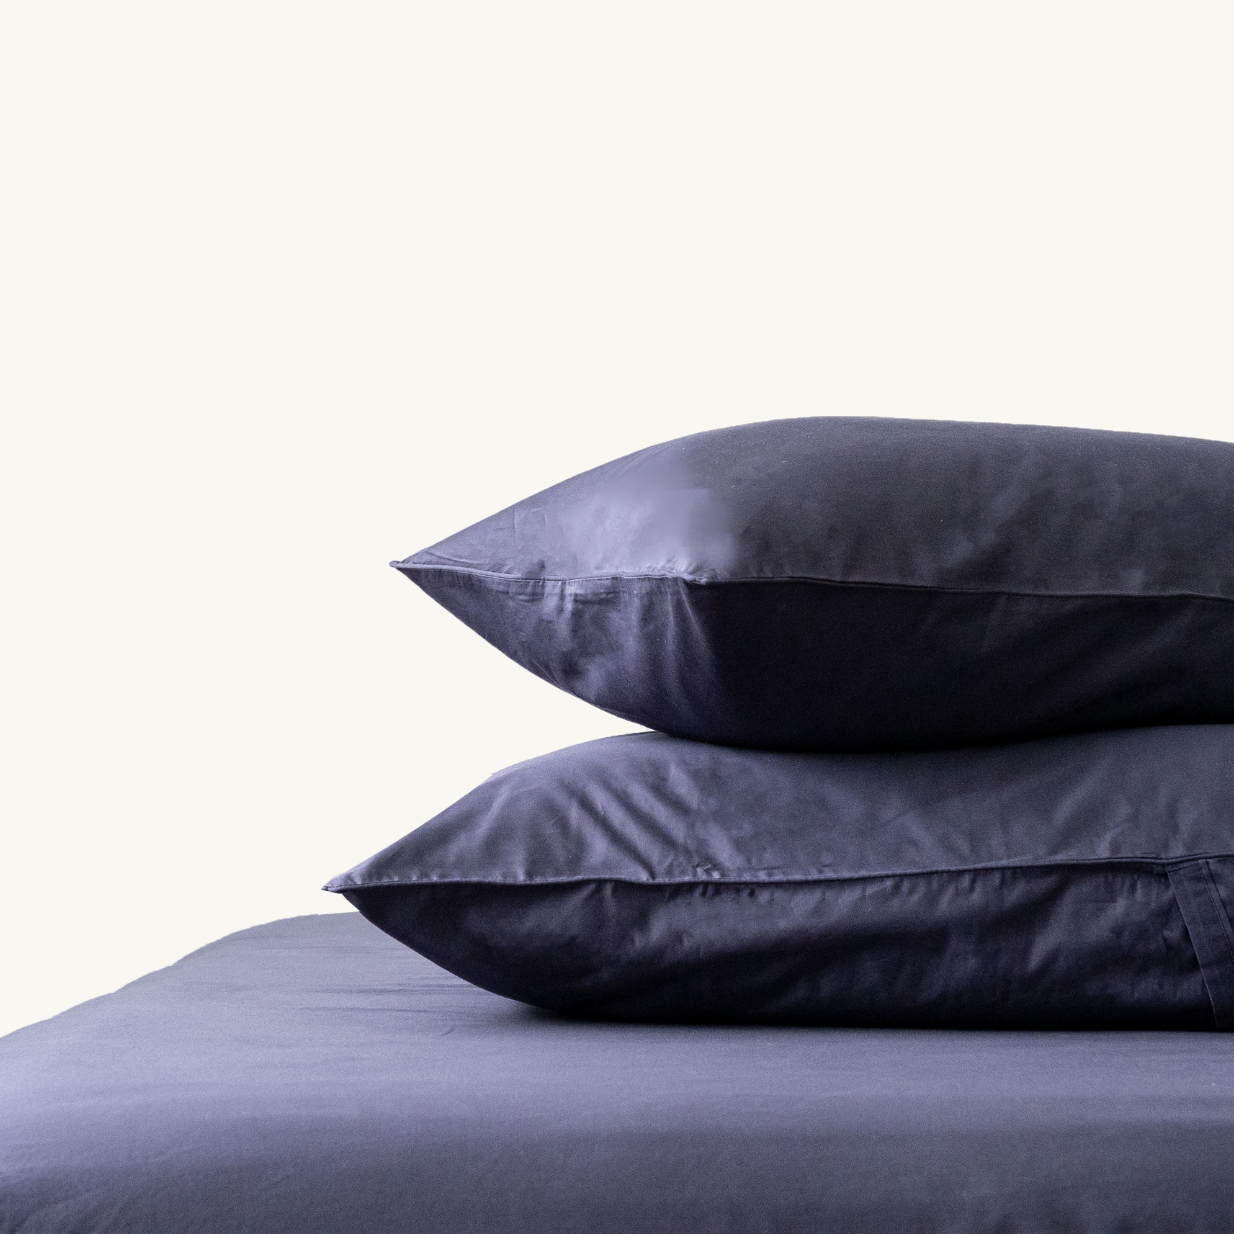 Midnight Blue TENCEL Bed Sheets Fitted Sheet Set with Tencel fitted sheet, Tencel Pillow Case, Tencel Duvet Cover. Buy Midnight Blue Tencel Fitted bed sheet set at Weavve Home, Best Bed Sheets Singapore and Luxury Hotel Sheets. 400 High Thread Count Bed Sheet. 